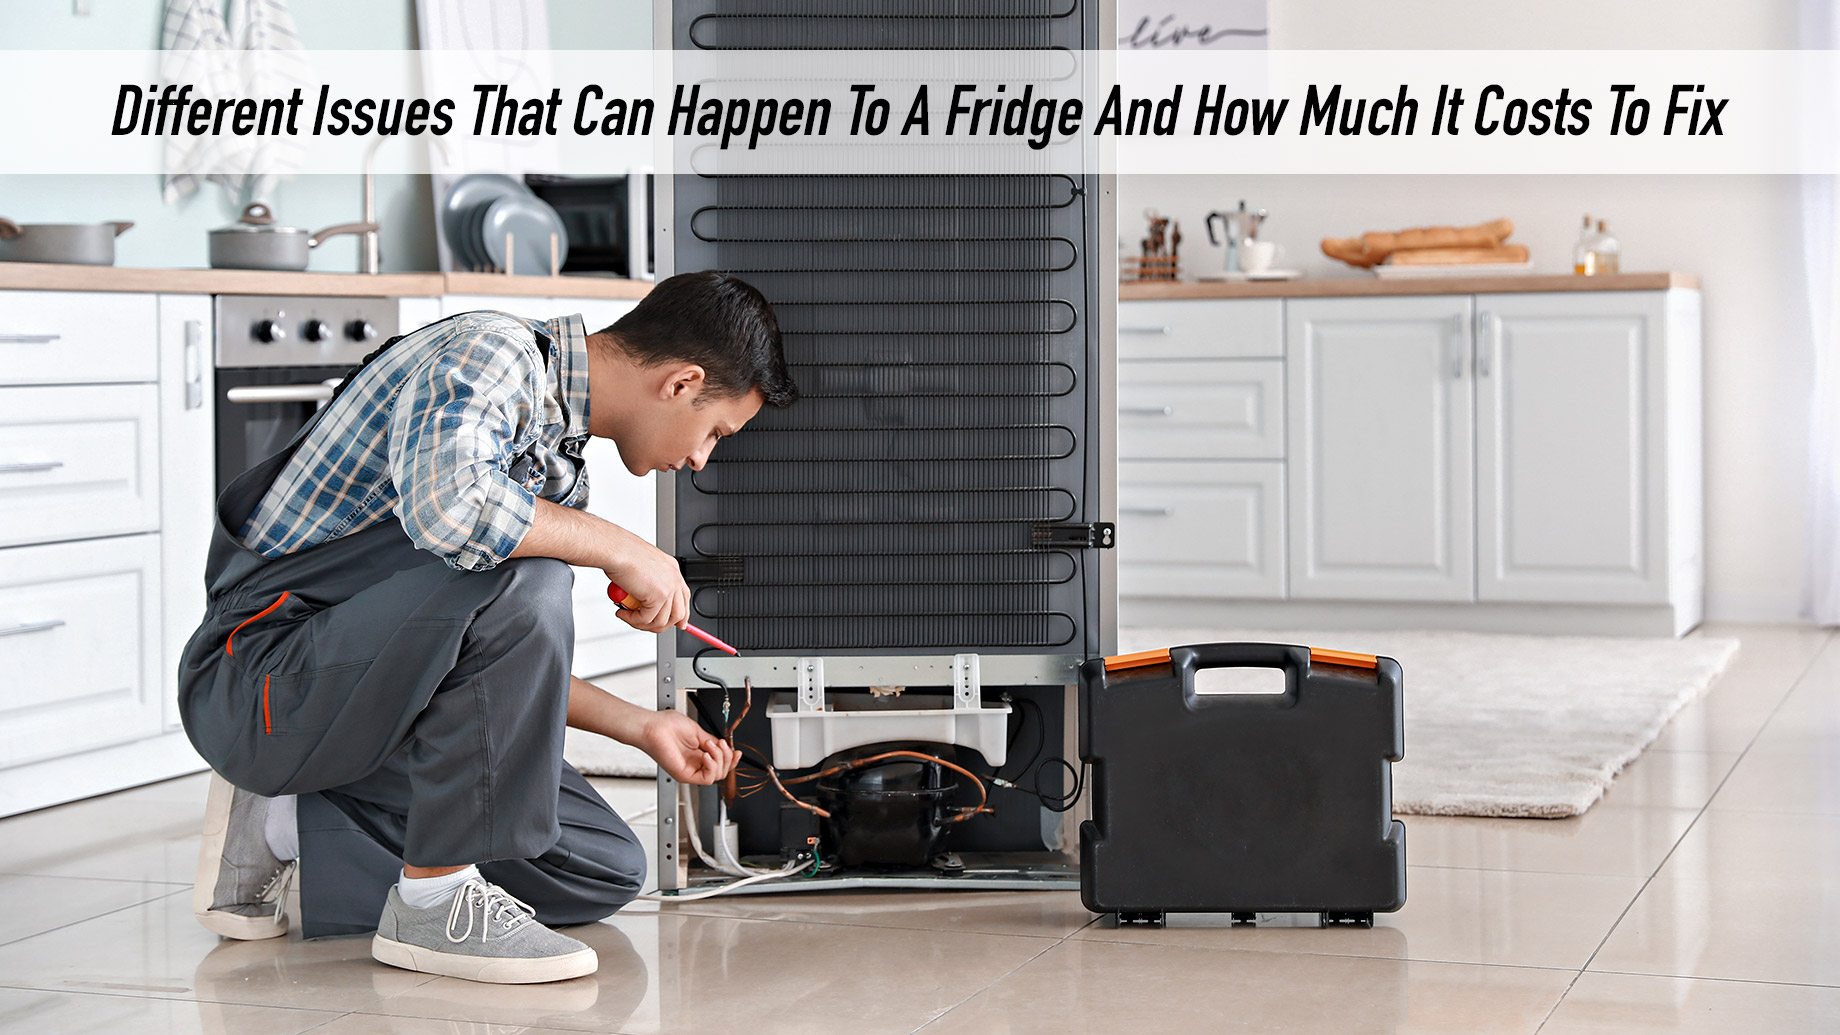 Different Issues That Can Happen To A Fridge And How Much It Costs To Fix